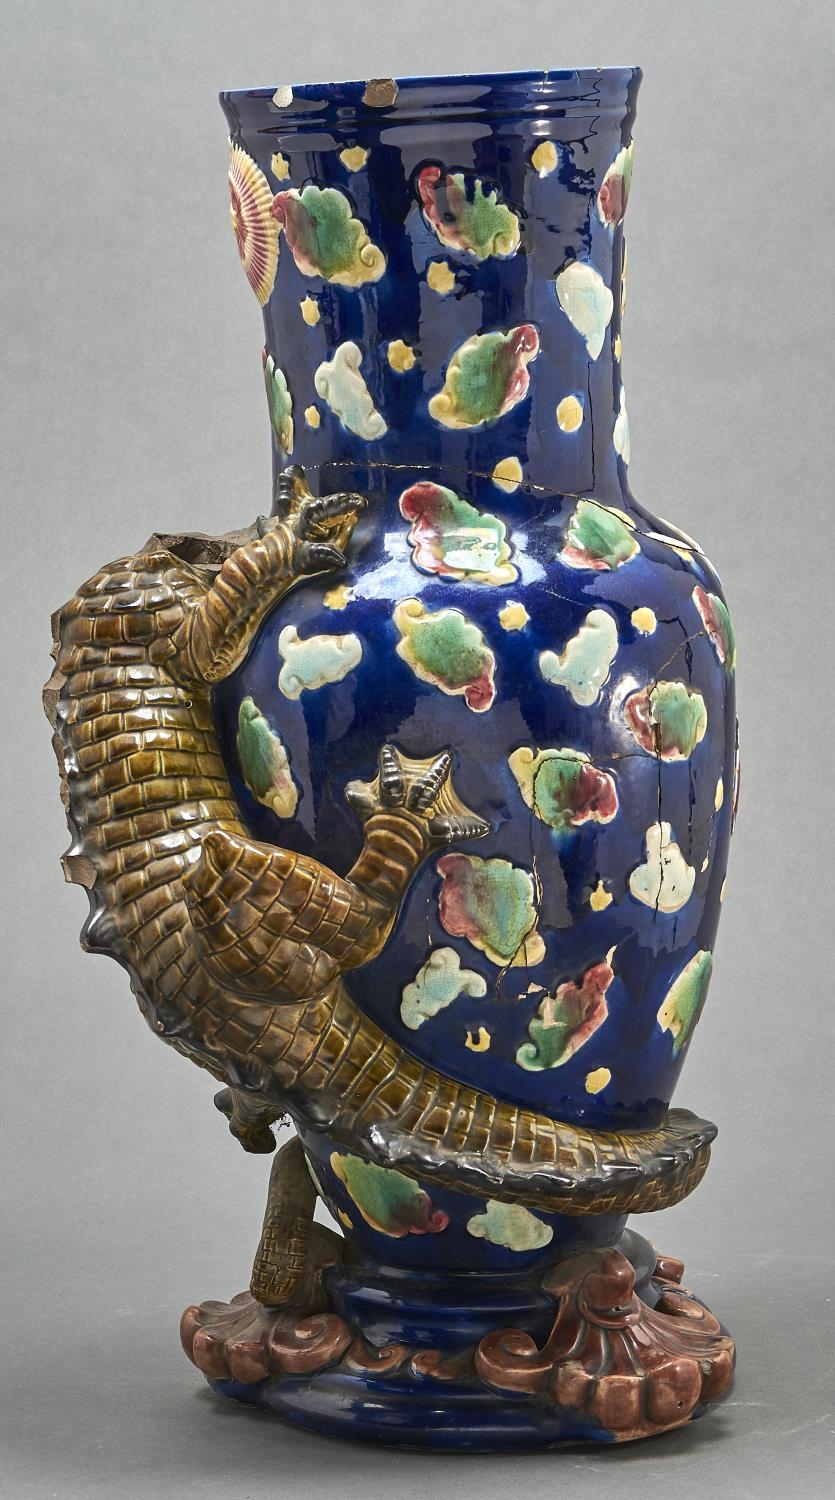 A majolica dragon vase, late 19th c, the scaly olive green creature clinging to the blue vase, the